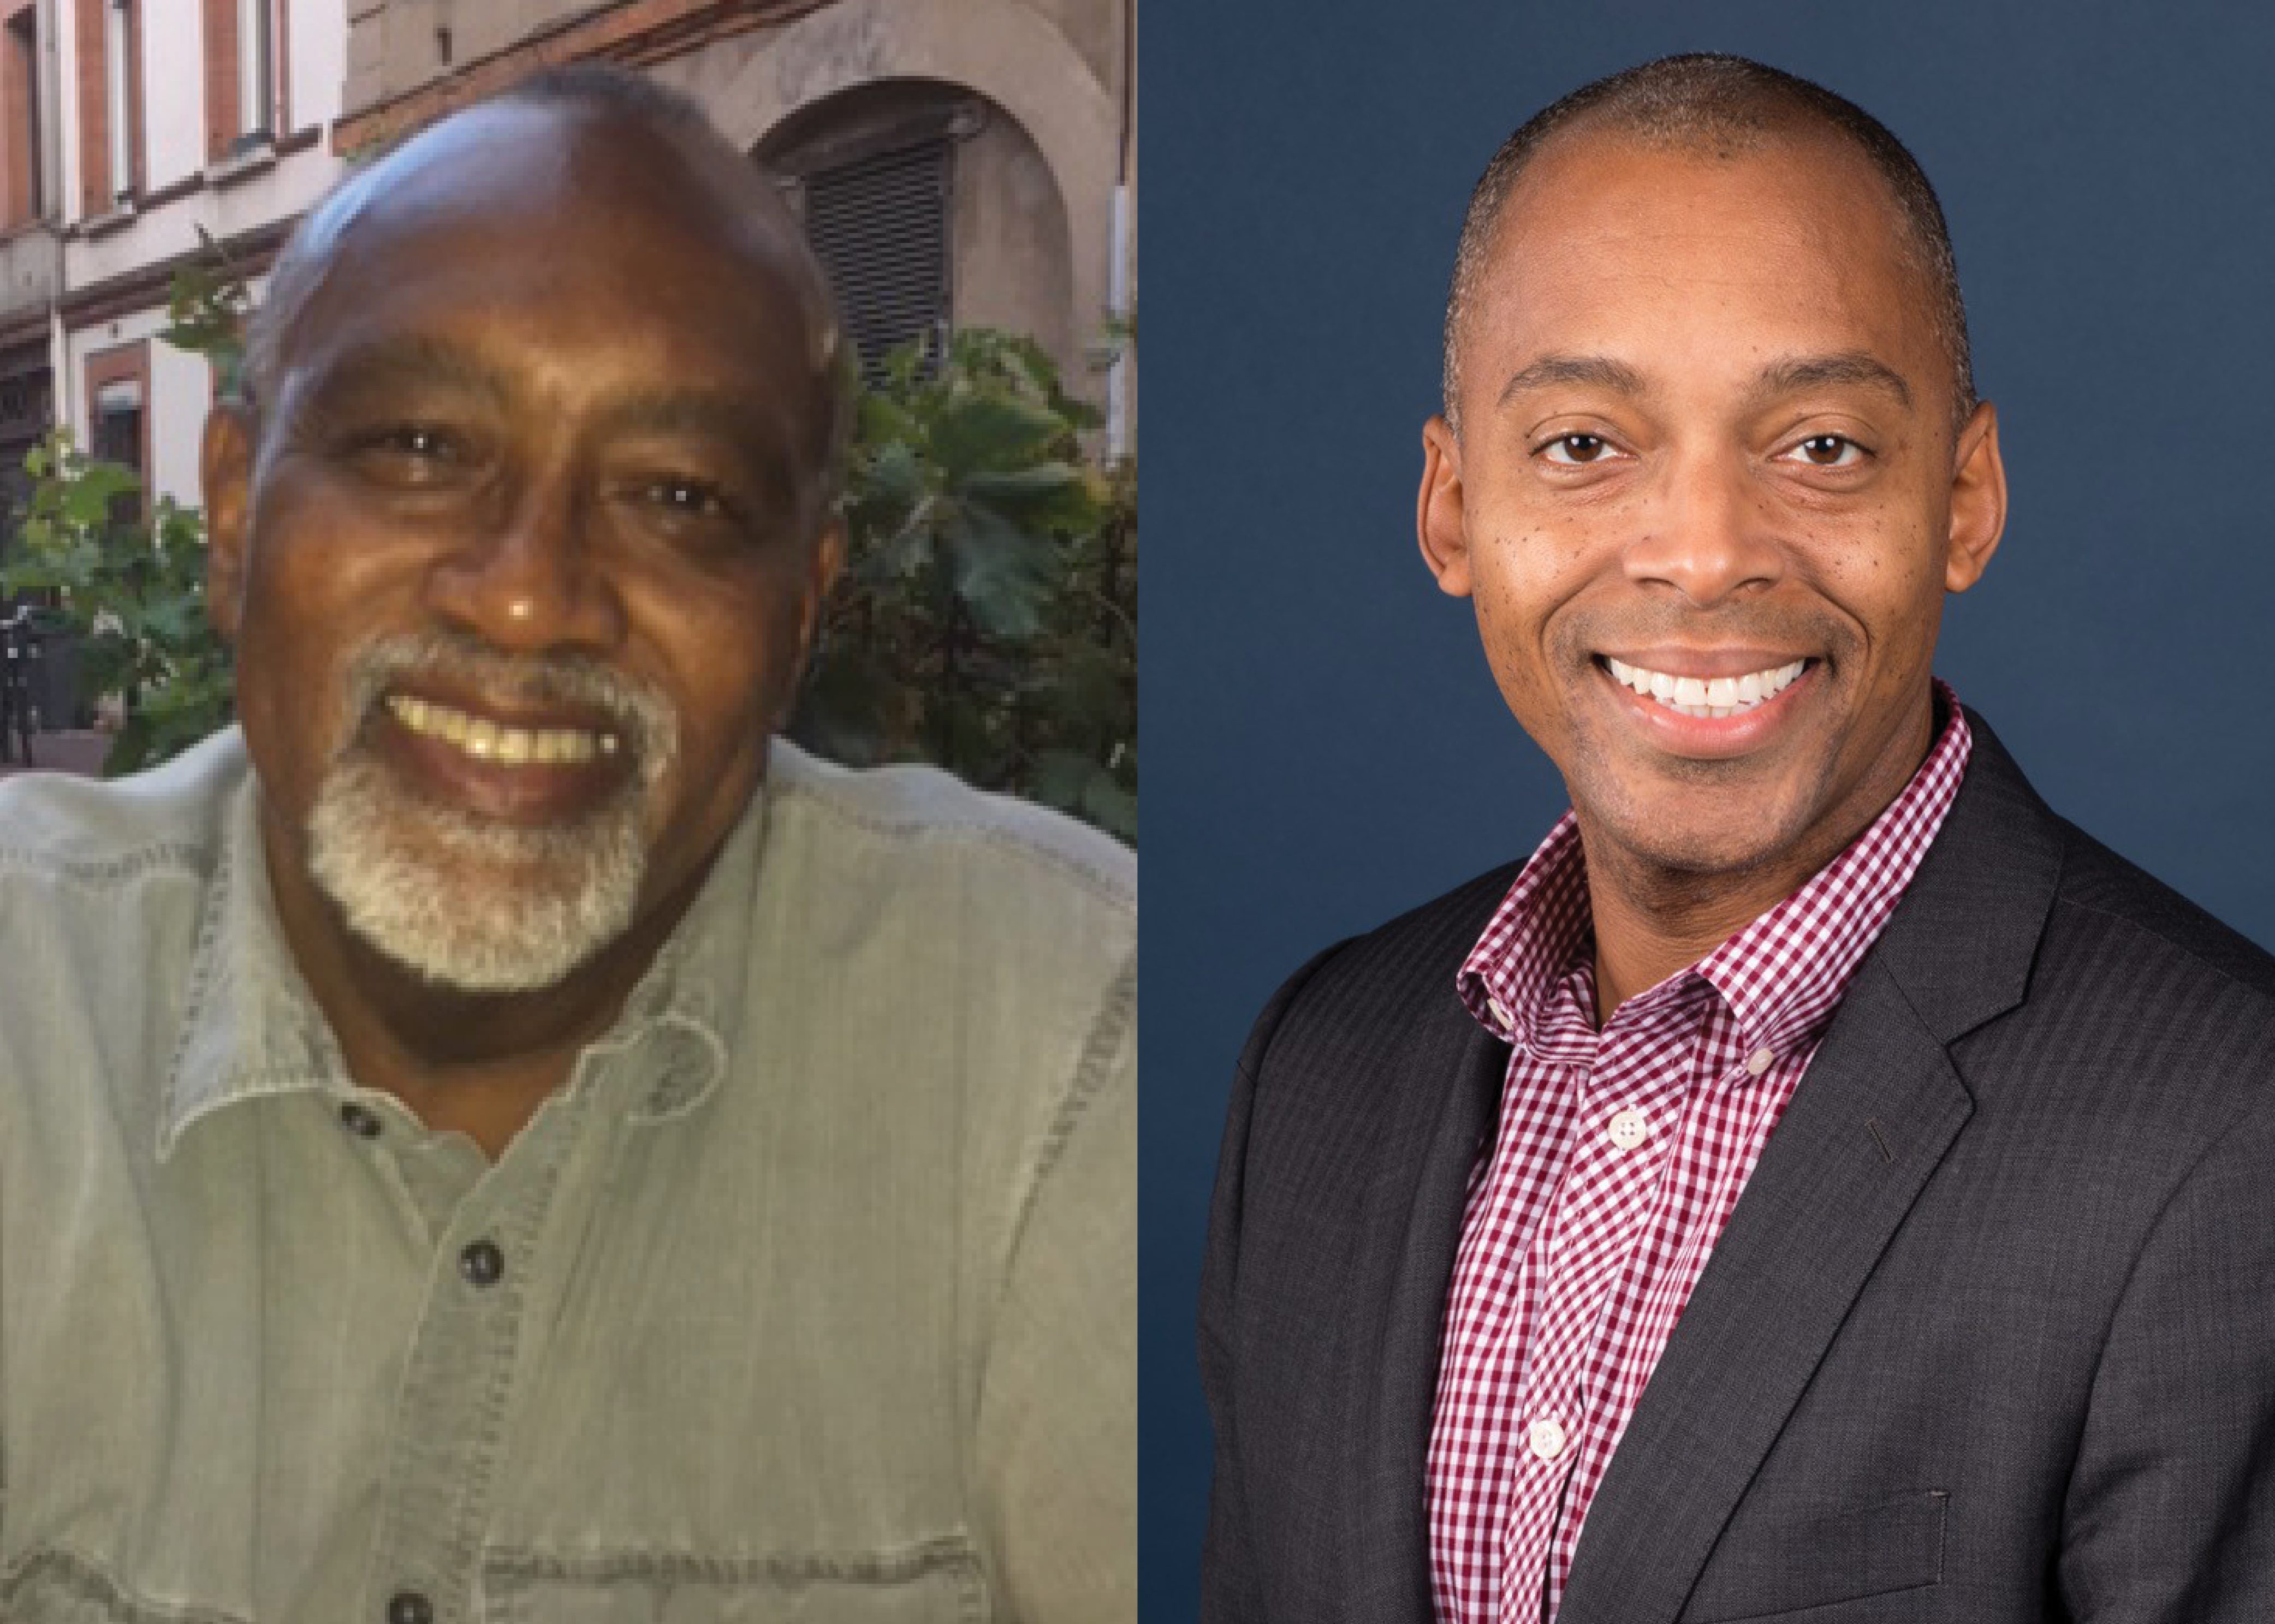 'Can We Talk Honestly About Race?: What Are the Causes of Racial Disparities in Contemporary America?' with Glenn Loury and Khalil Gibran Muhammad